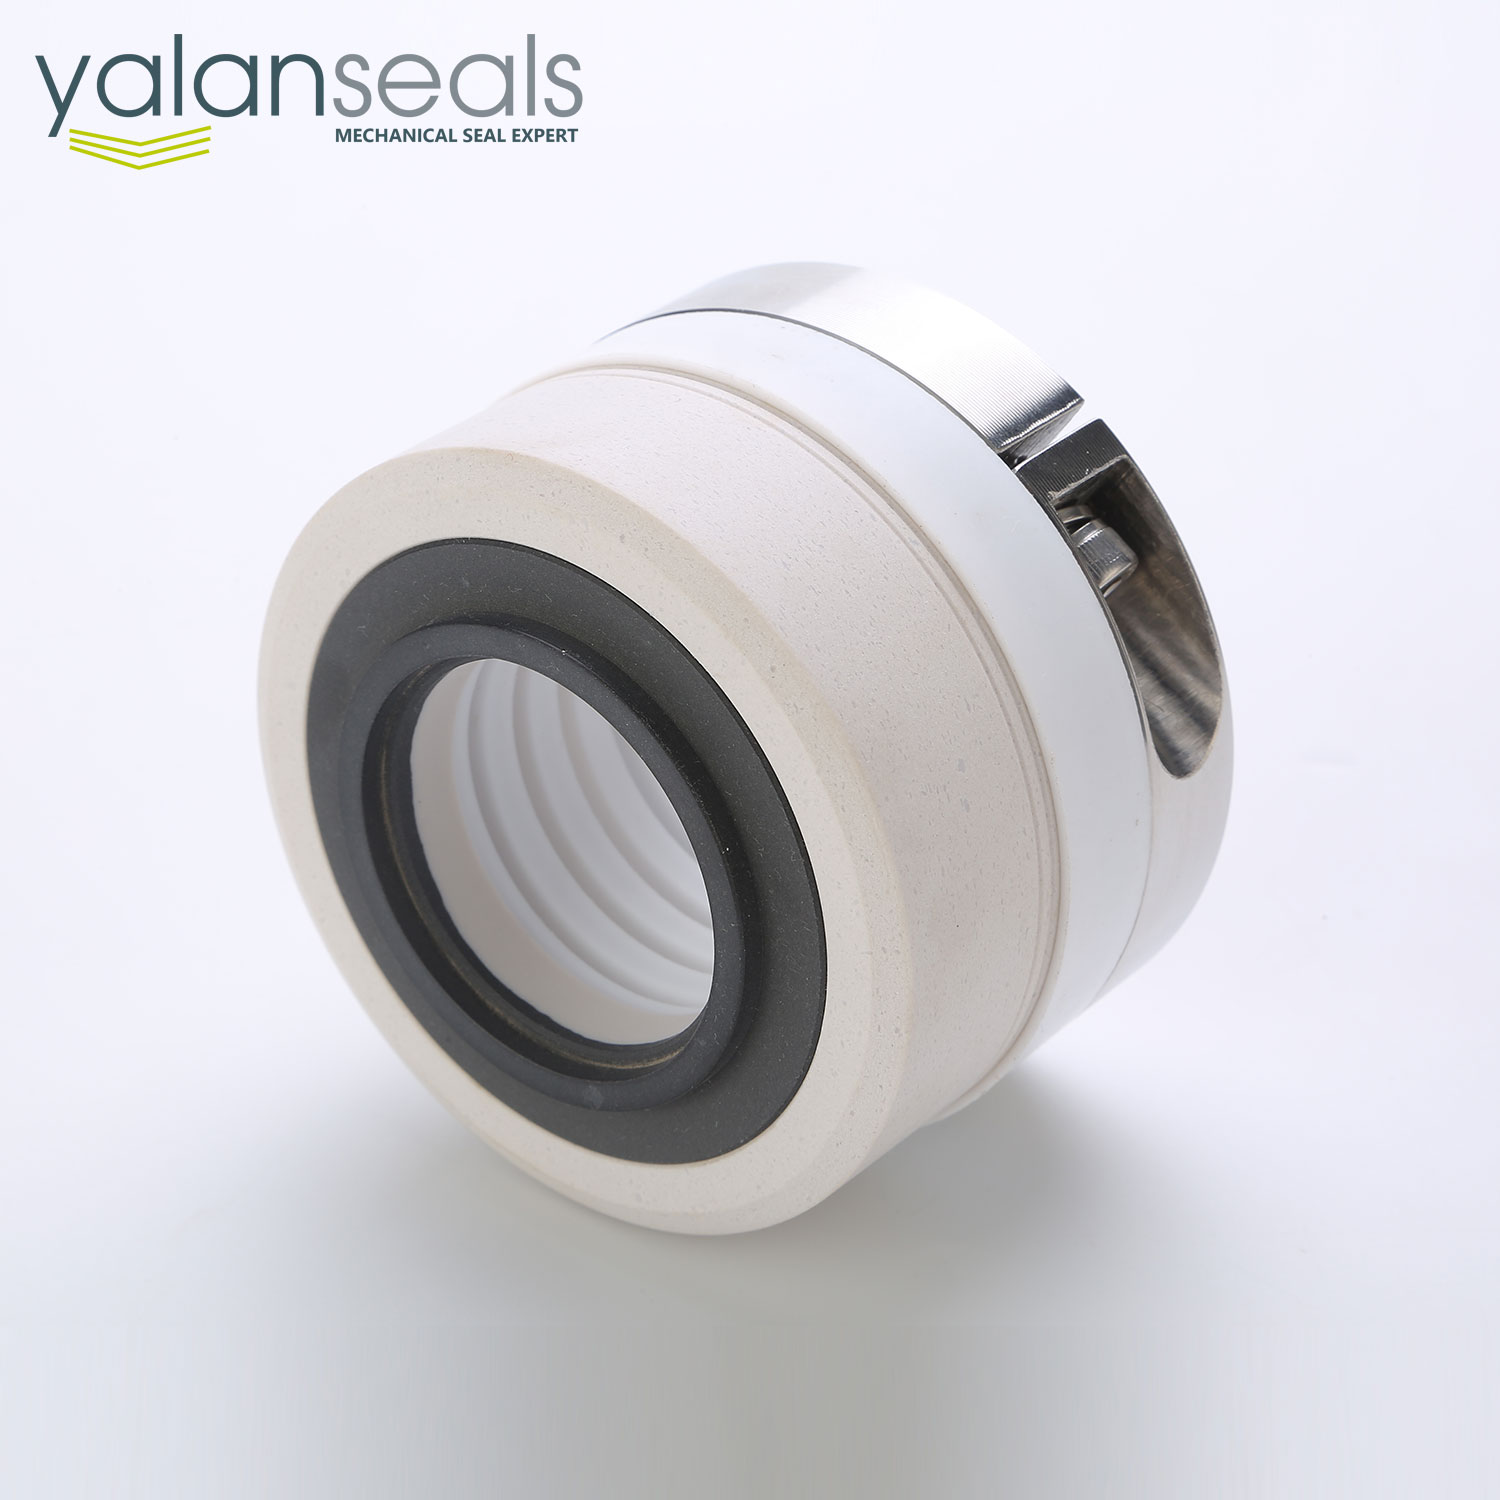 WB2 (Type 152) PTFE Bellow Mechanical Seal Rotary